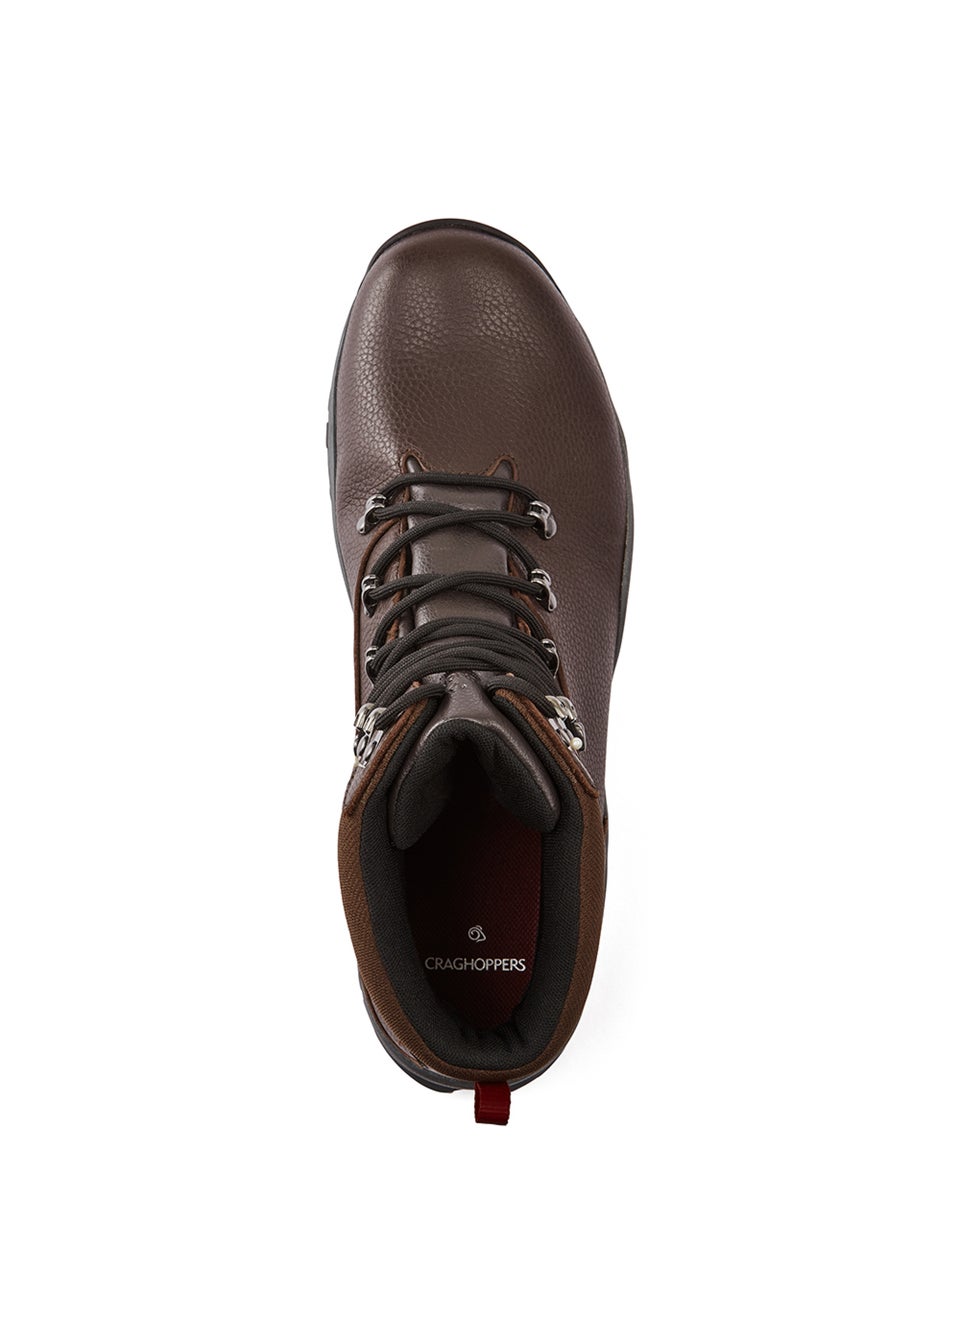 Craghoppers Brown Kiwi Lite Leather Hiking Boots - Matalan